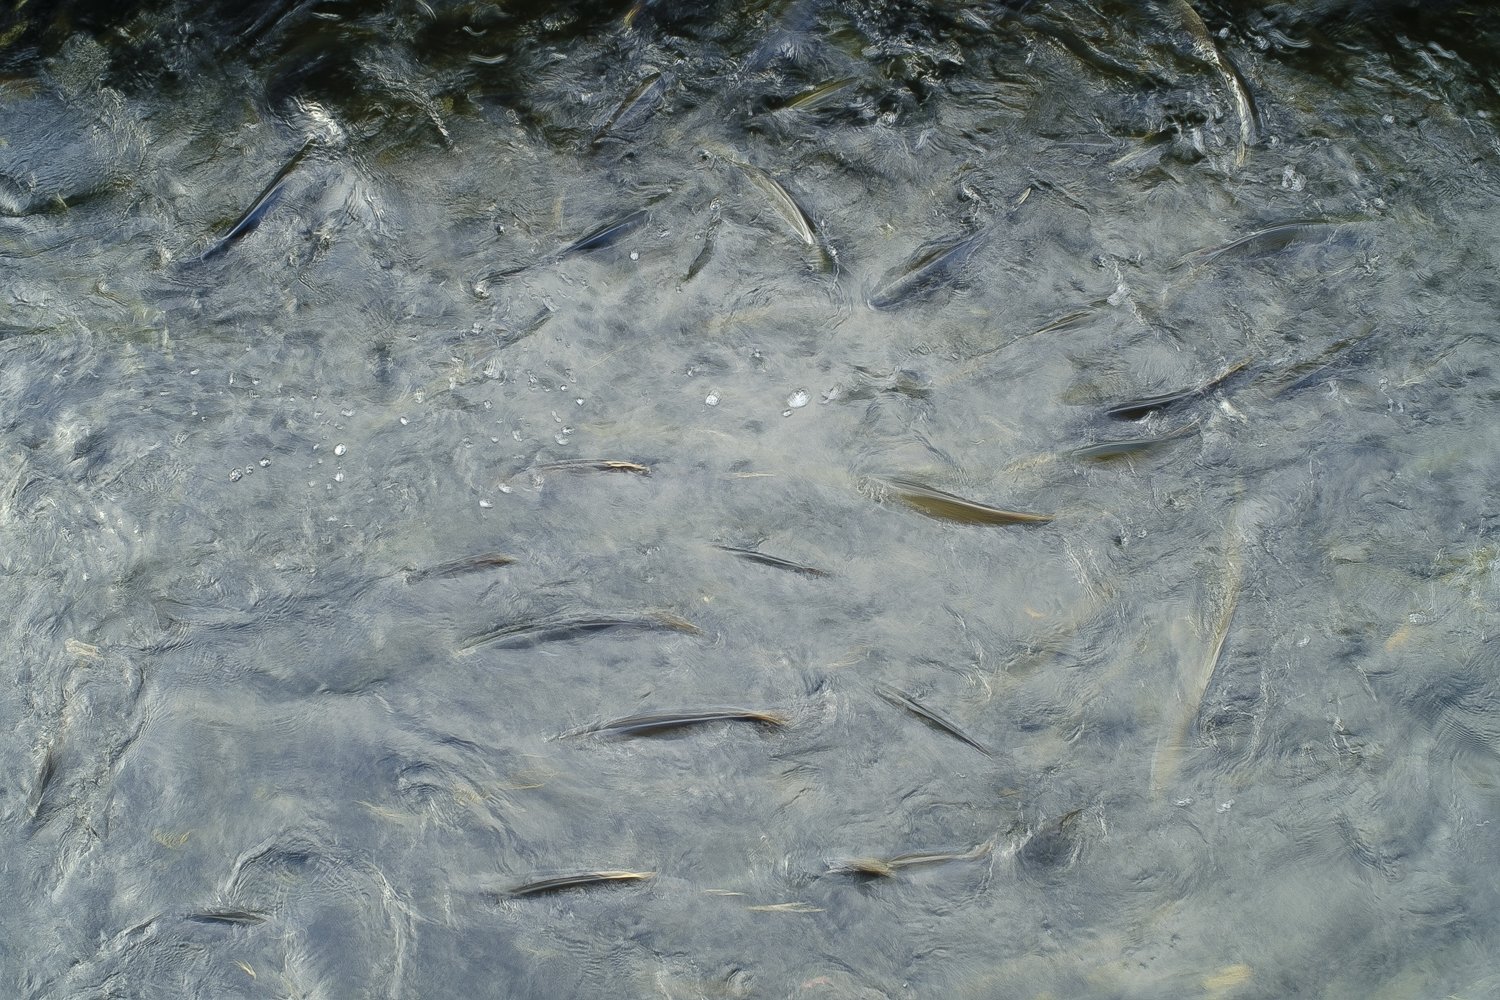  Salmon congregate in the holding pens at the Salmon River Fish Hatchery in Altmar, New York. The salmon run is thoroughly dependent on the efforts of the taxpayer funded hatchery to maintain populations in a heavily pressured river.     